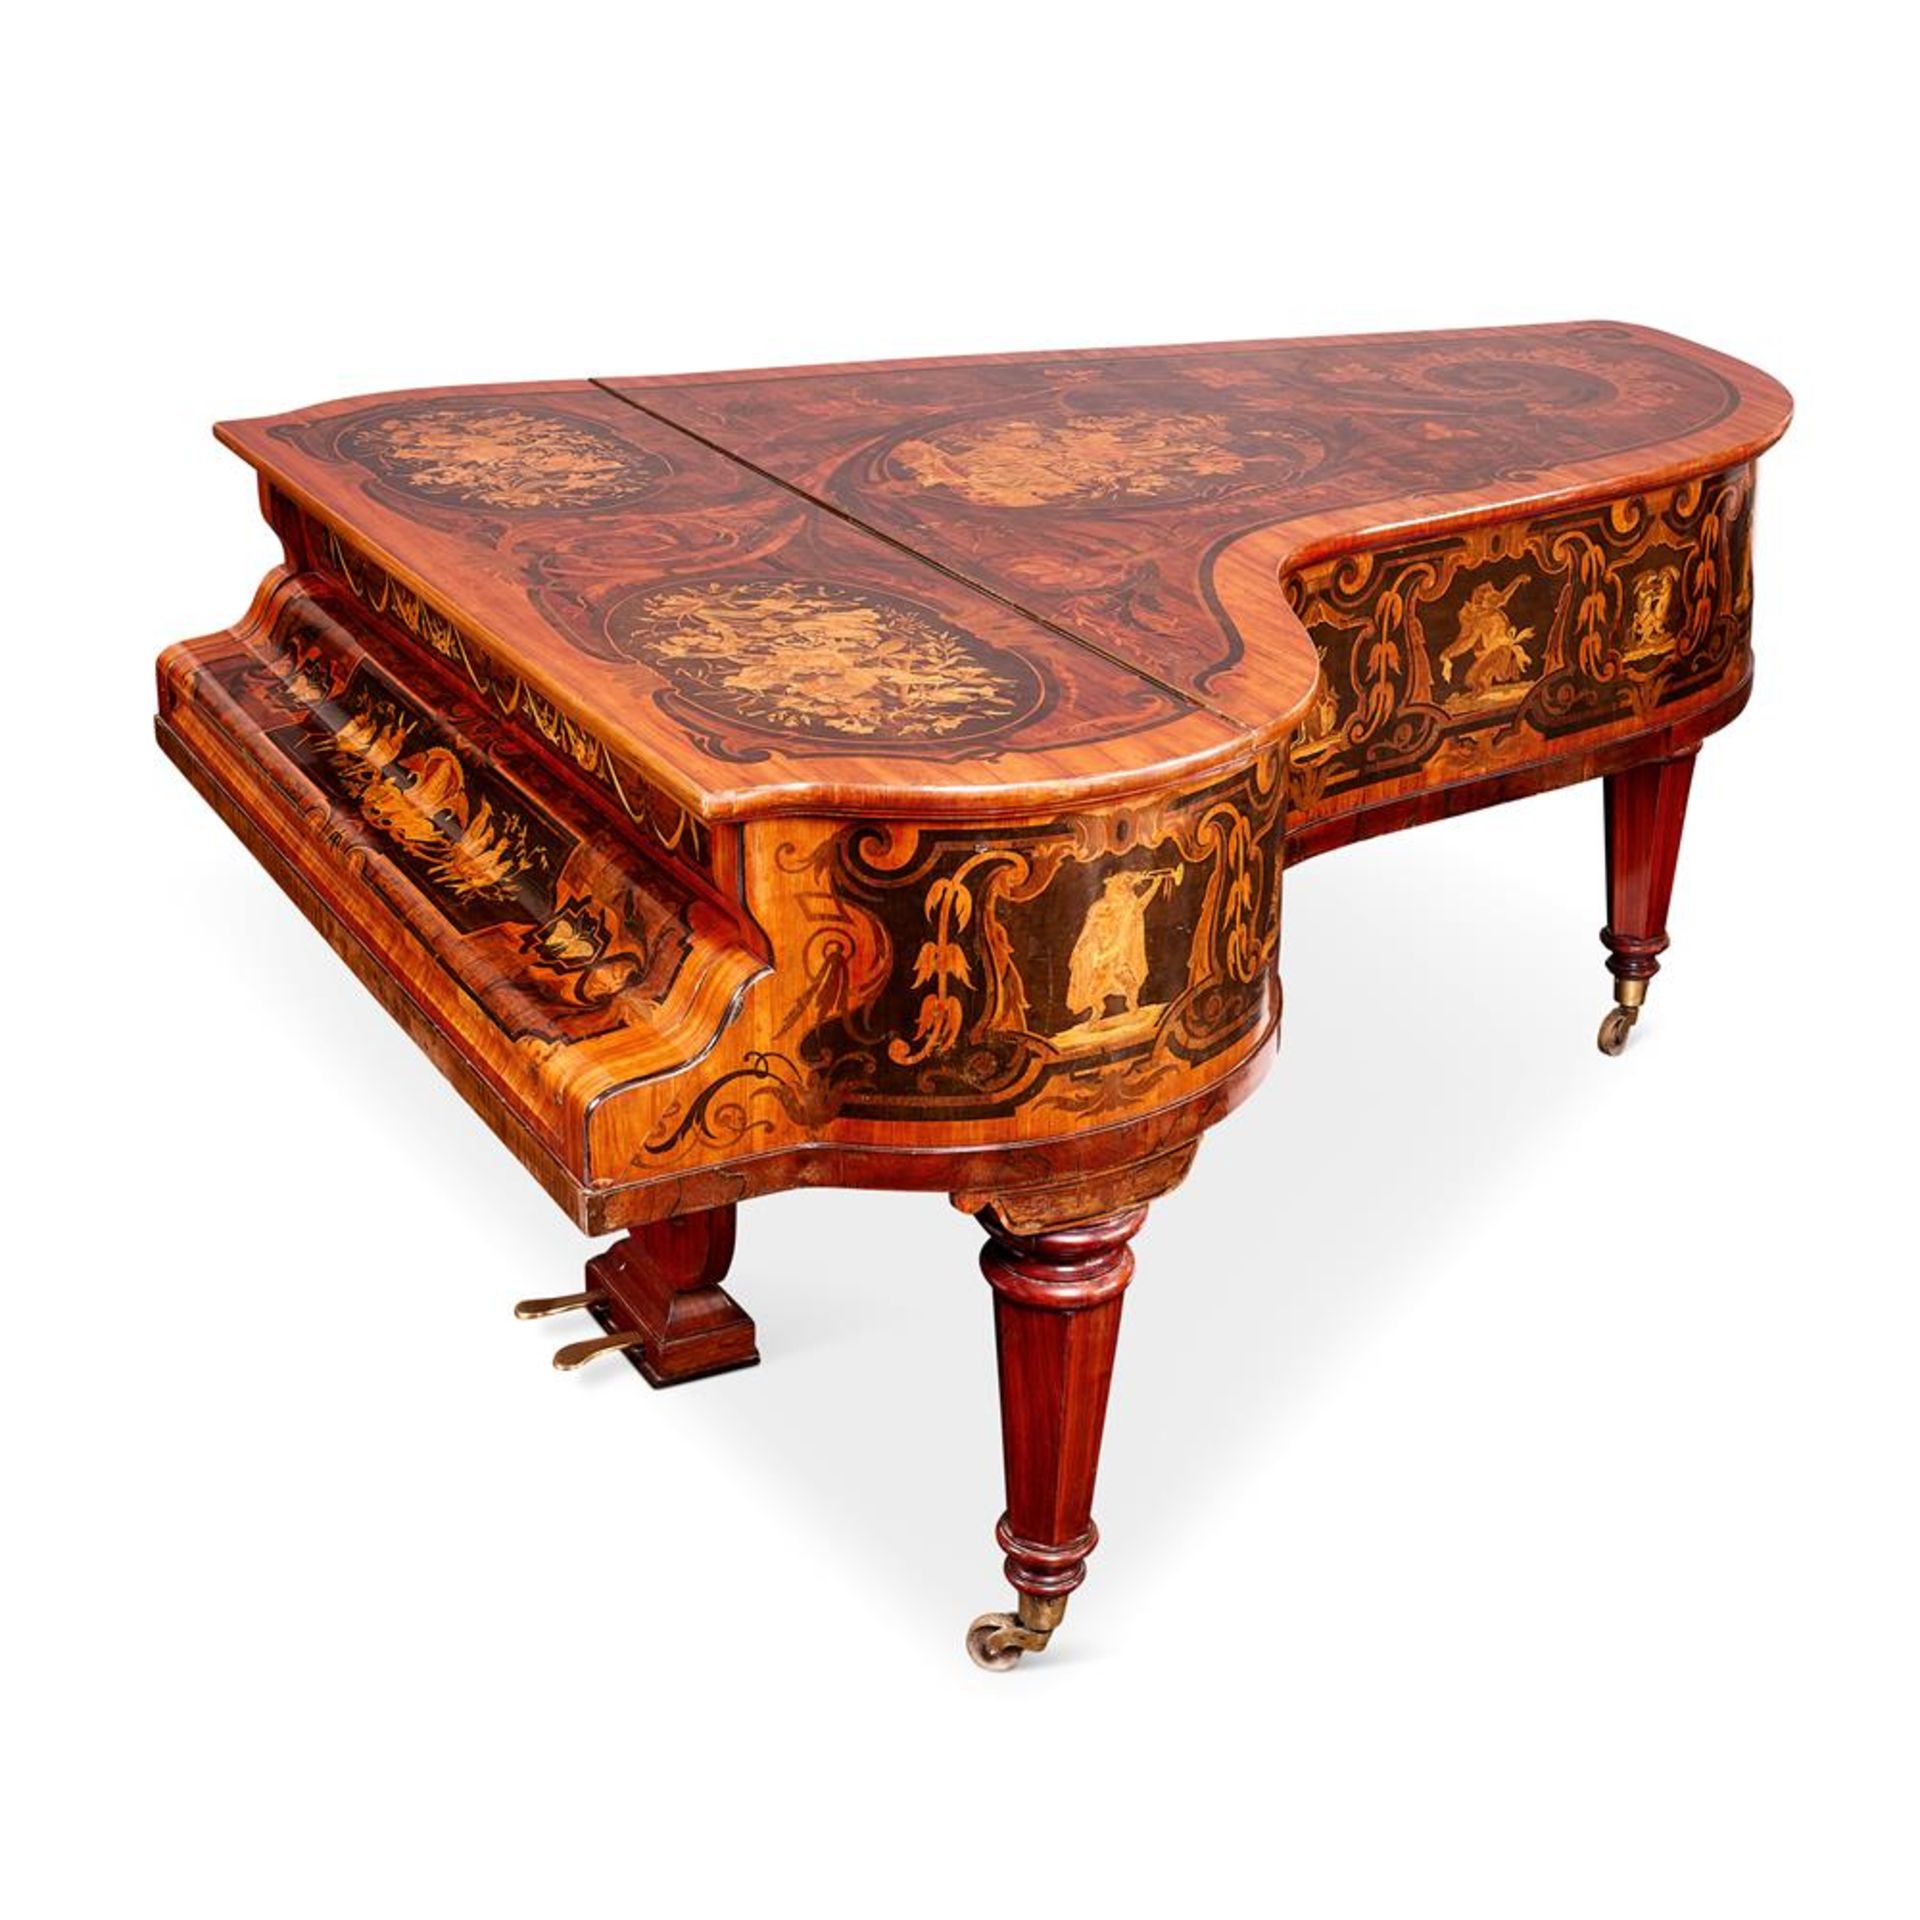 Y A RUSSIAN ROSEWOOD, GONCALO ALVES, TULIPWOOD AND MARQUETRY GRAND PIANO, THIRD QUARTER 19TH CENTURY - Bild 2 aus 2